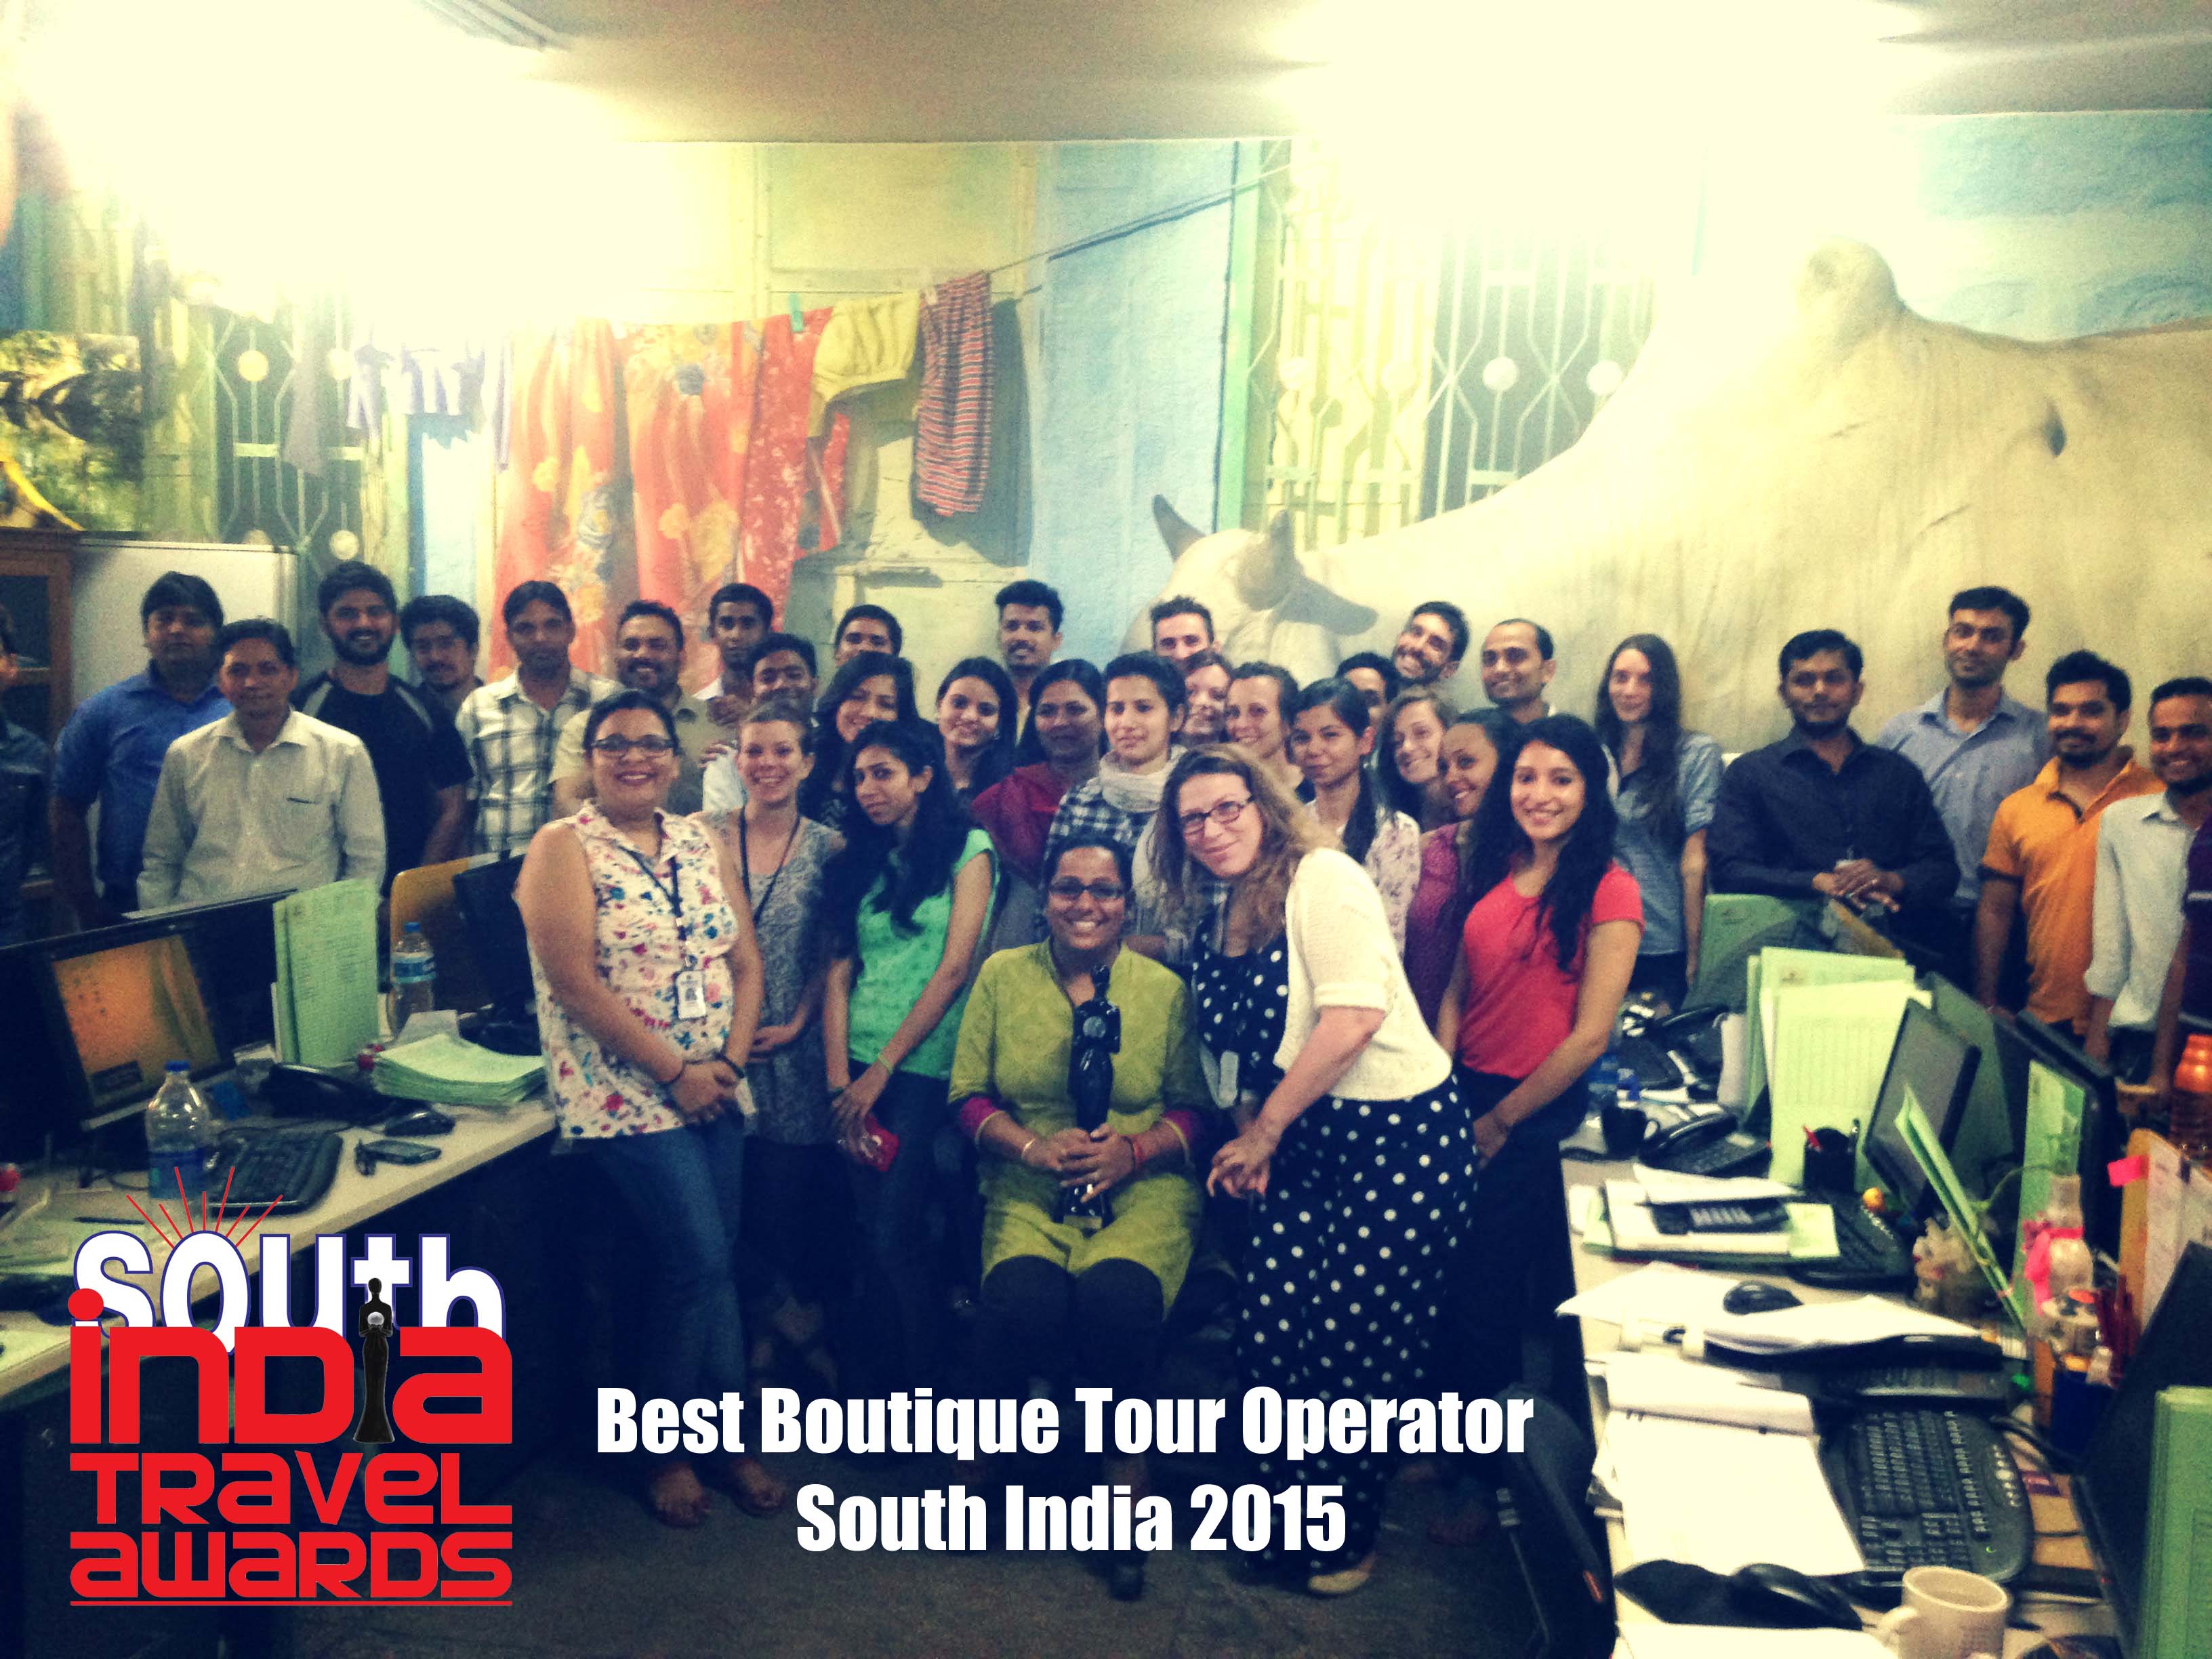 Best Boutique Tour Operator - South India 2015